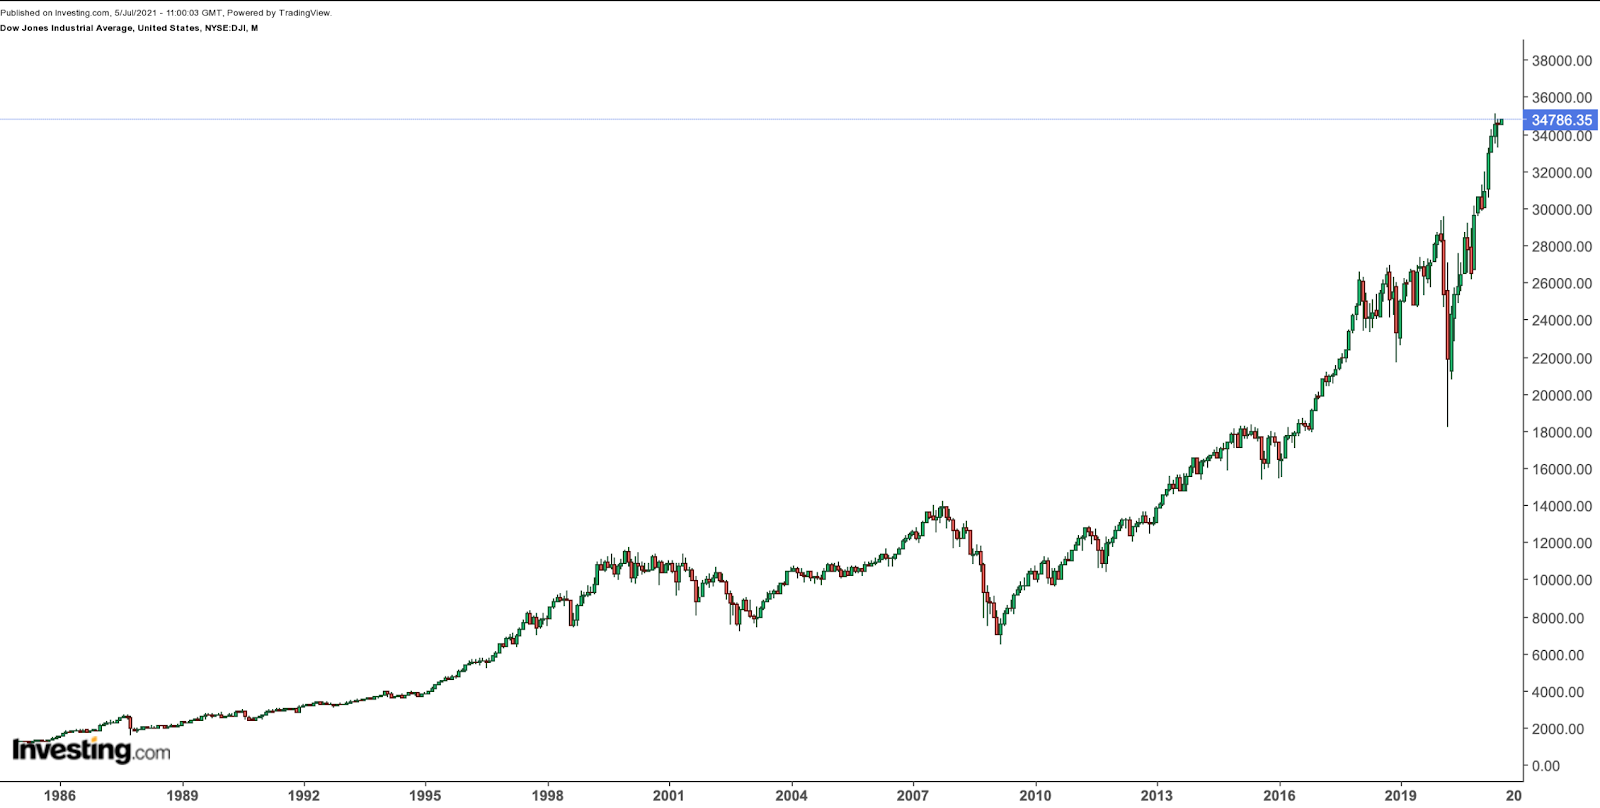 DJIA Monthly